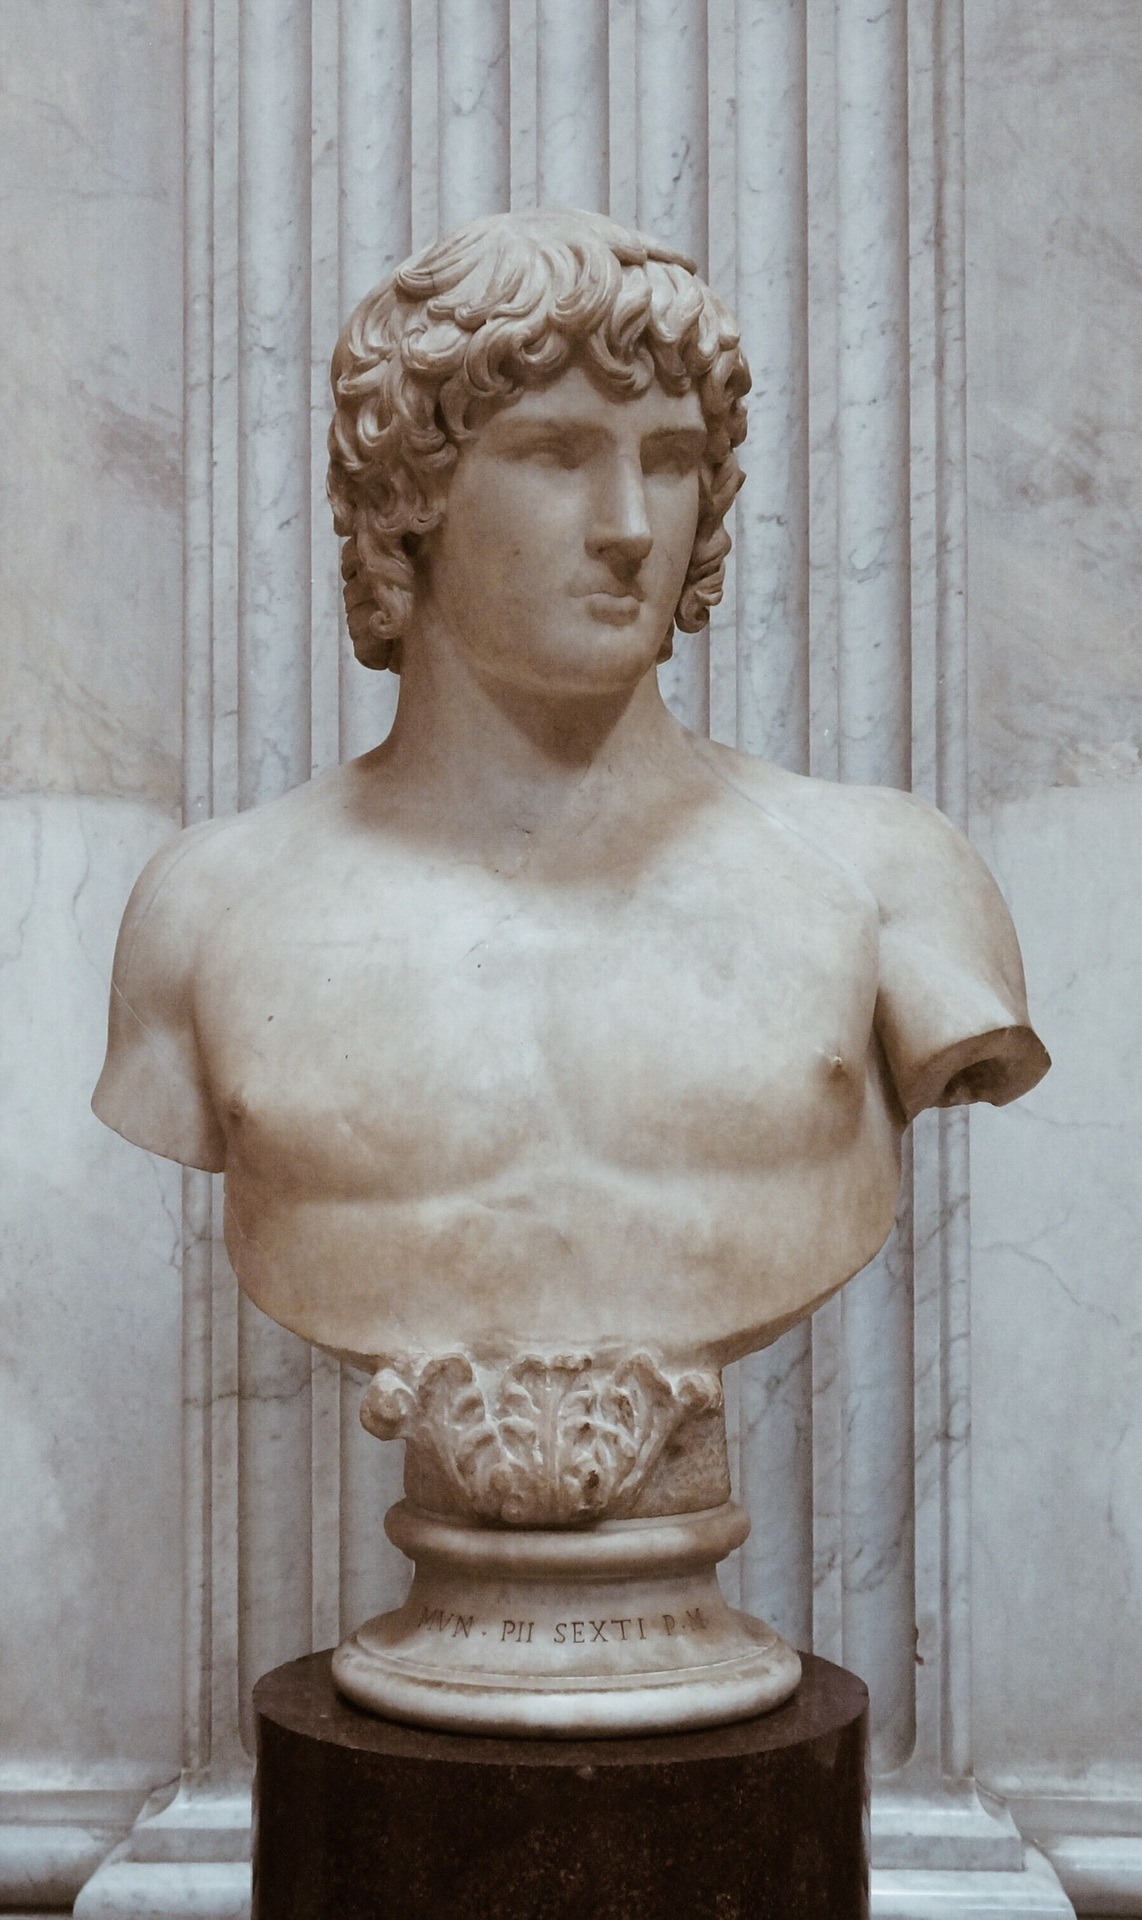 facesofthepast-colossal-bust-of-antinous-130-138-ad-from-villa